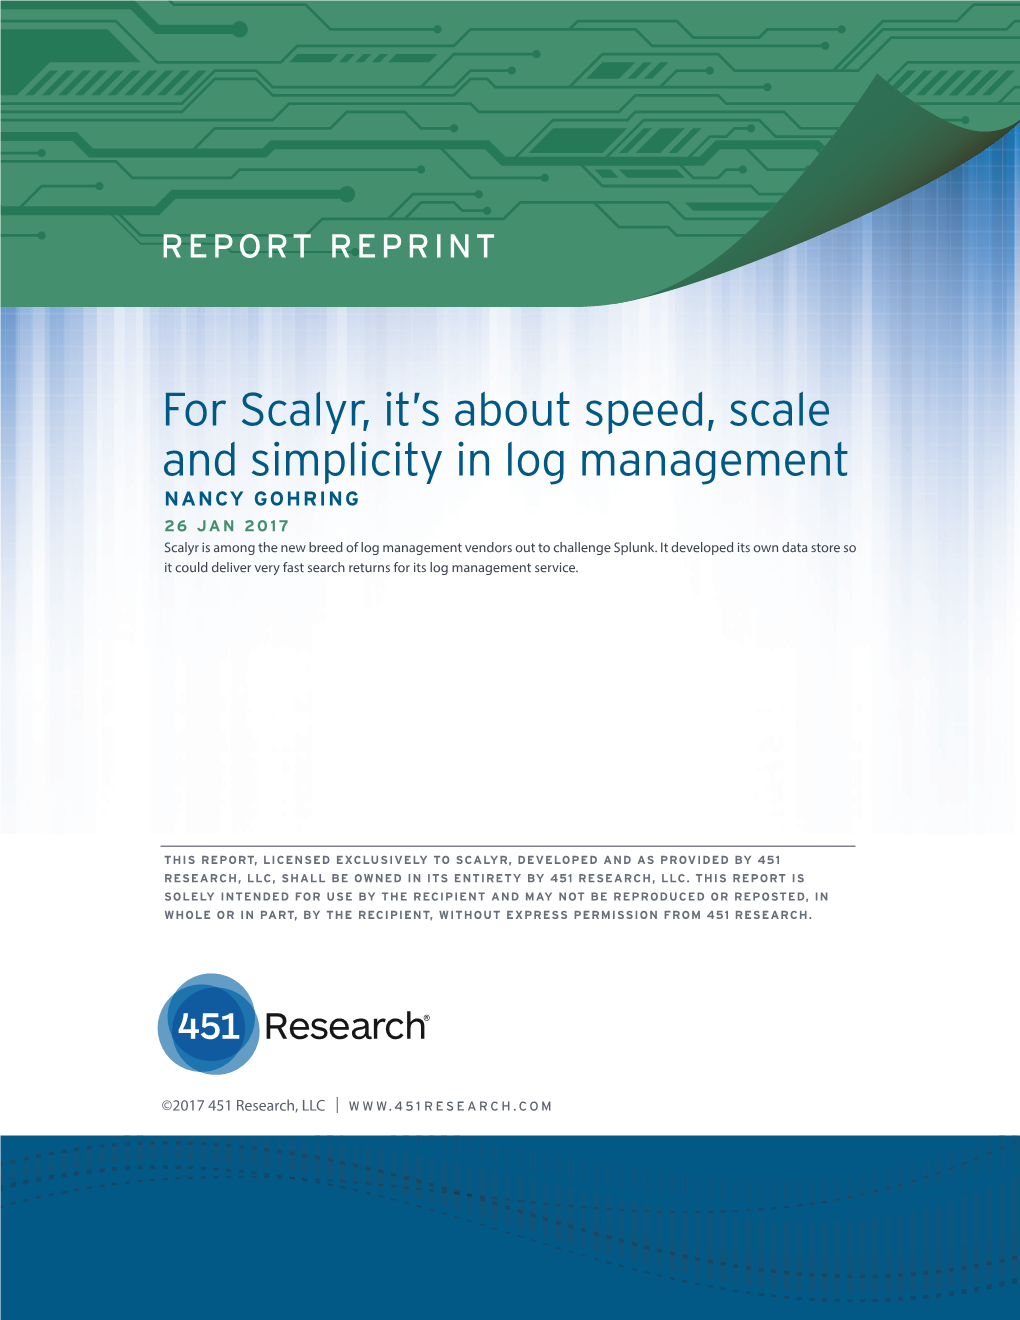 For Scalyr, It's About Speed, Scale and Simplicity in Log Management